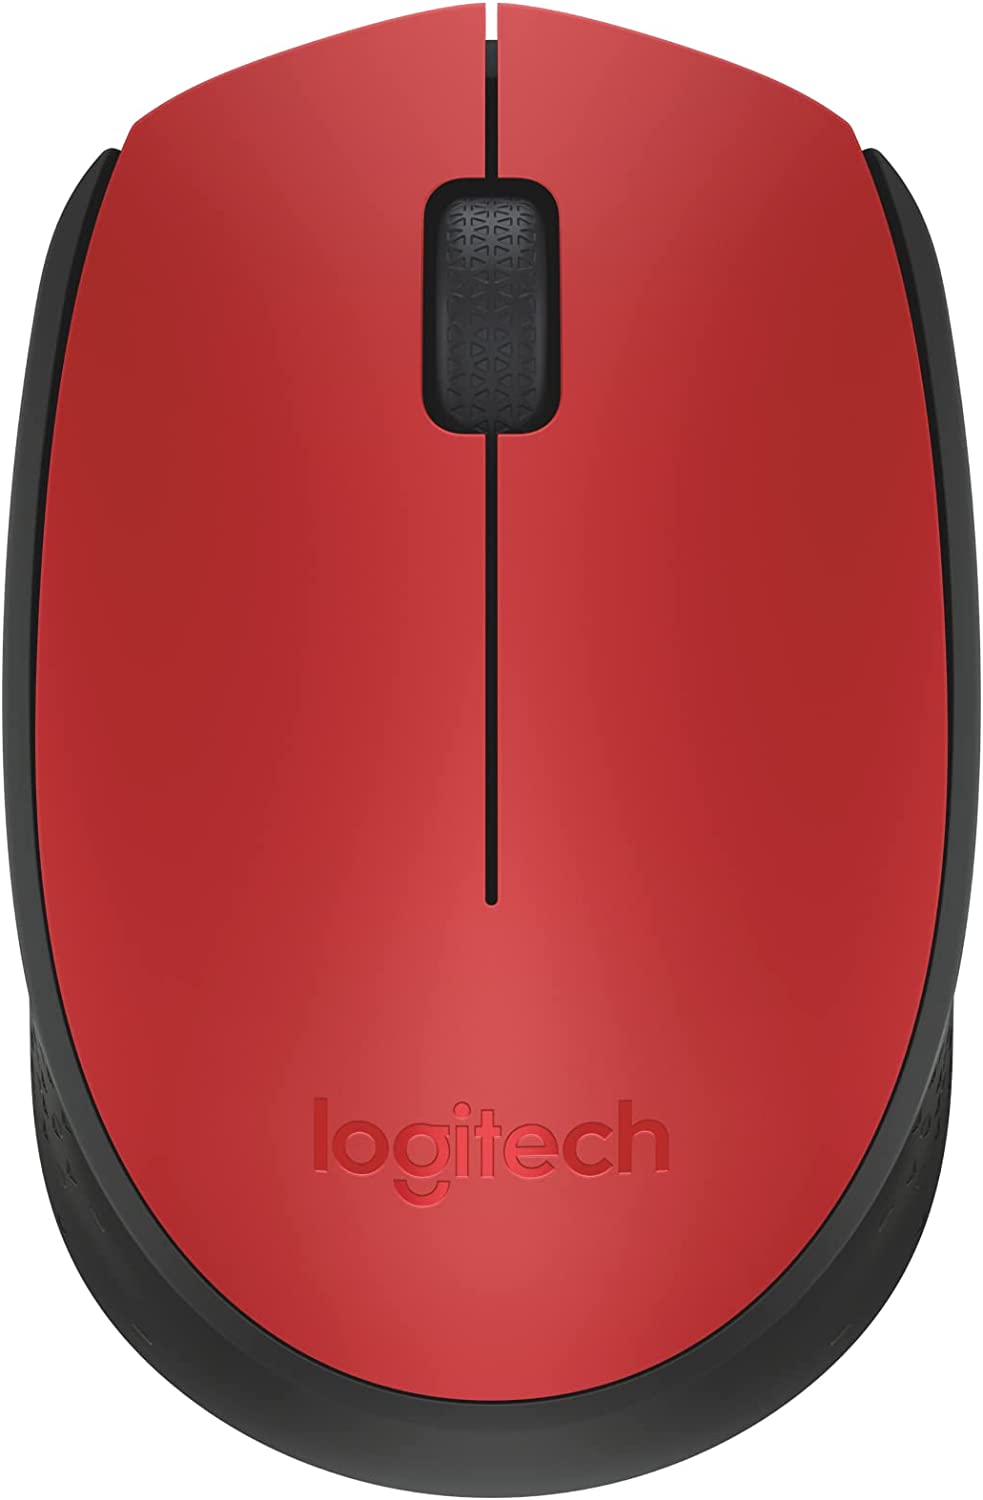 LOGITECH M170 MOUSE RIGHT AND LEFT HANDED WIRELESS 2.4GHZ USB WIRELESS RECEIVER RED